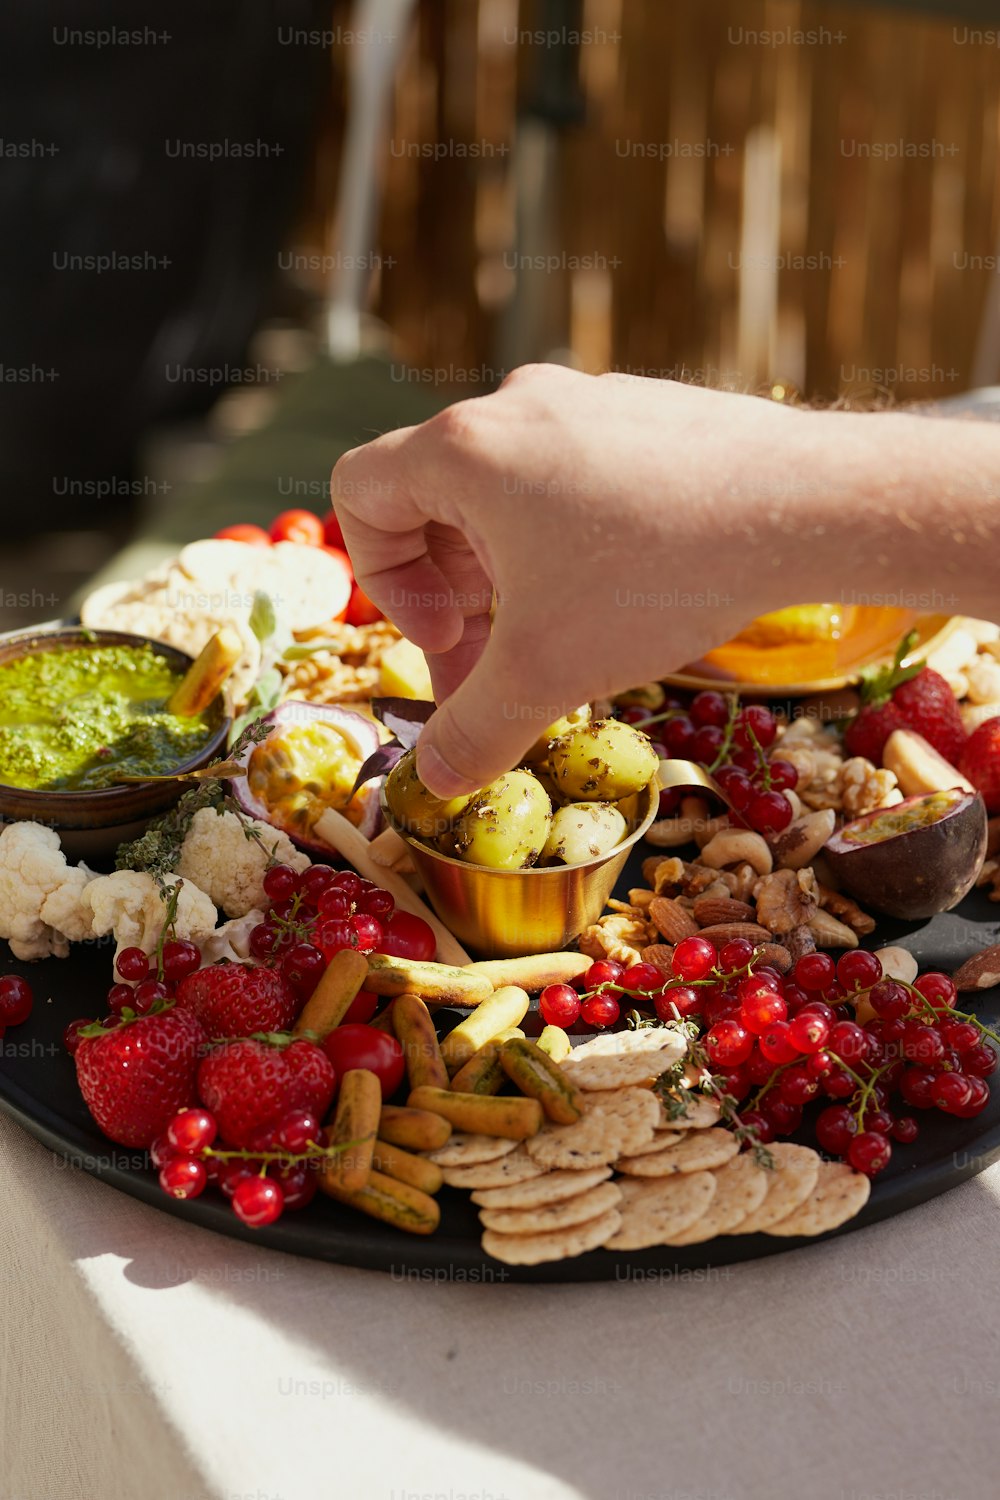 a plate of food that includes crackers, fruit, and nuts